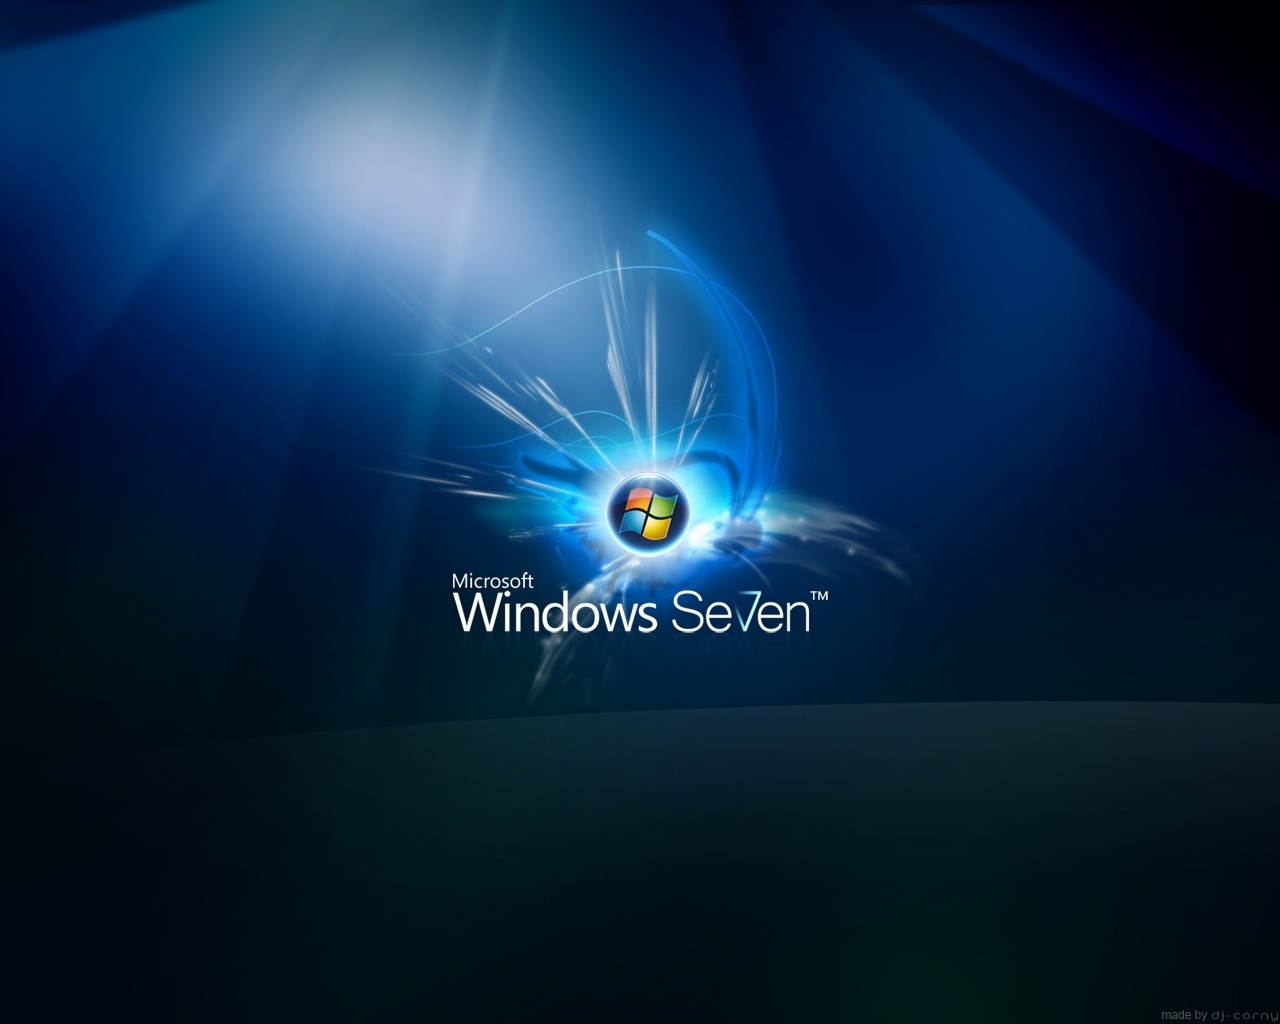 Windows Seven Glow for 1280 x 1024 resolution